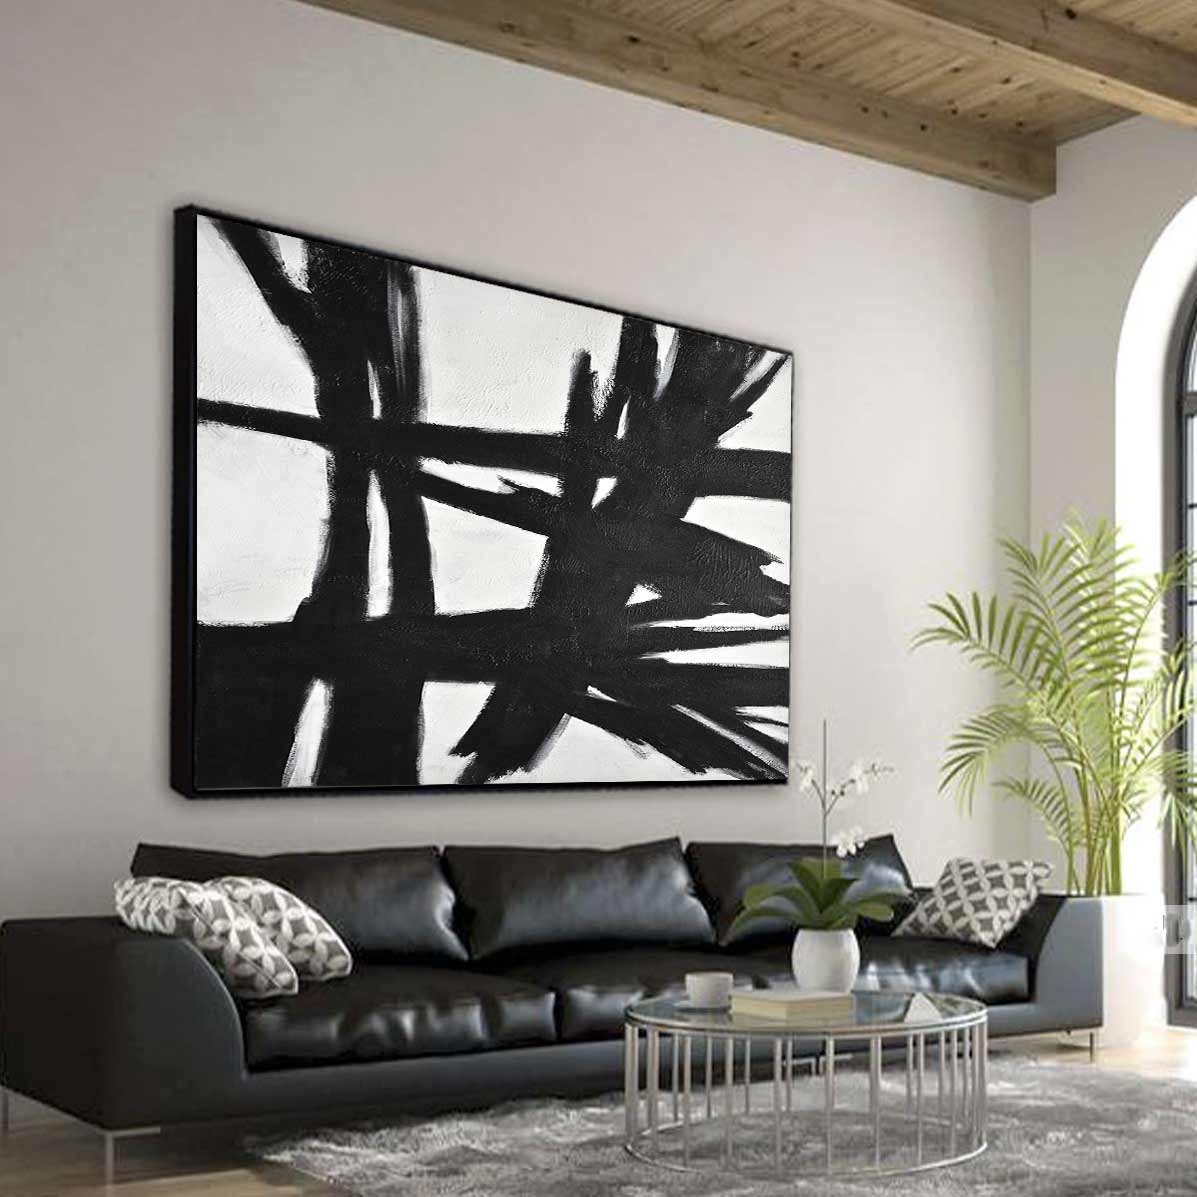 Black and White Modernism Abstract Expressionist Painting "Reaching Out"